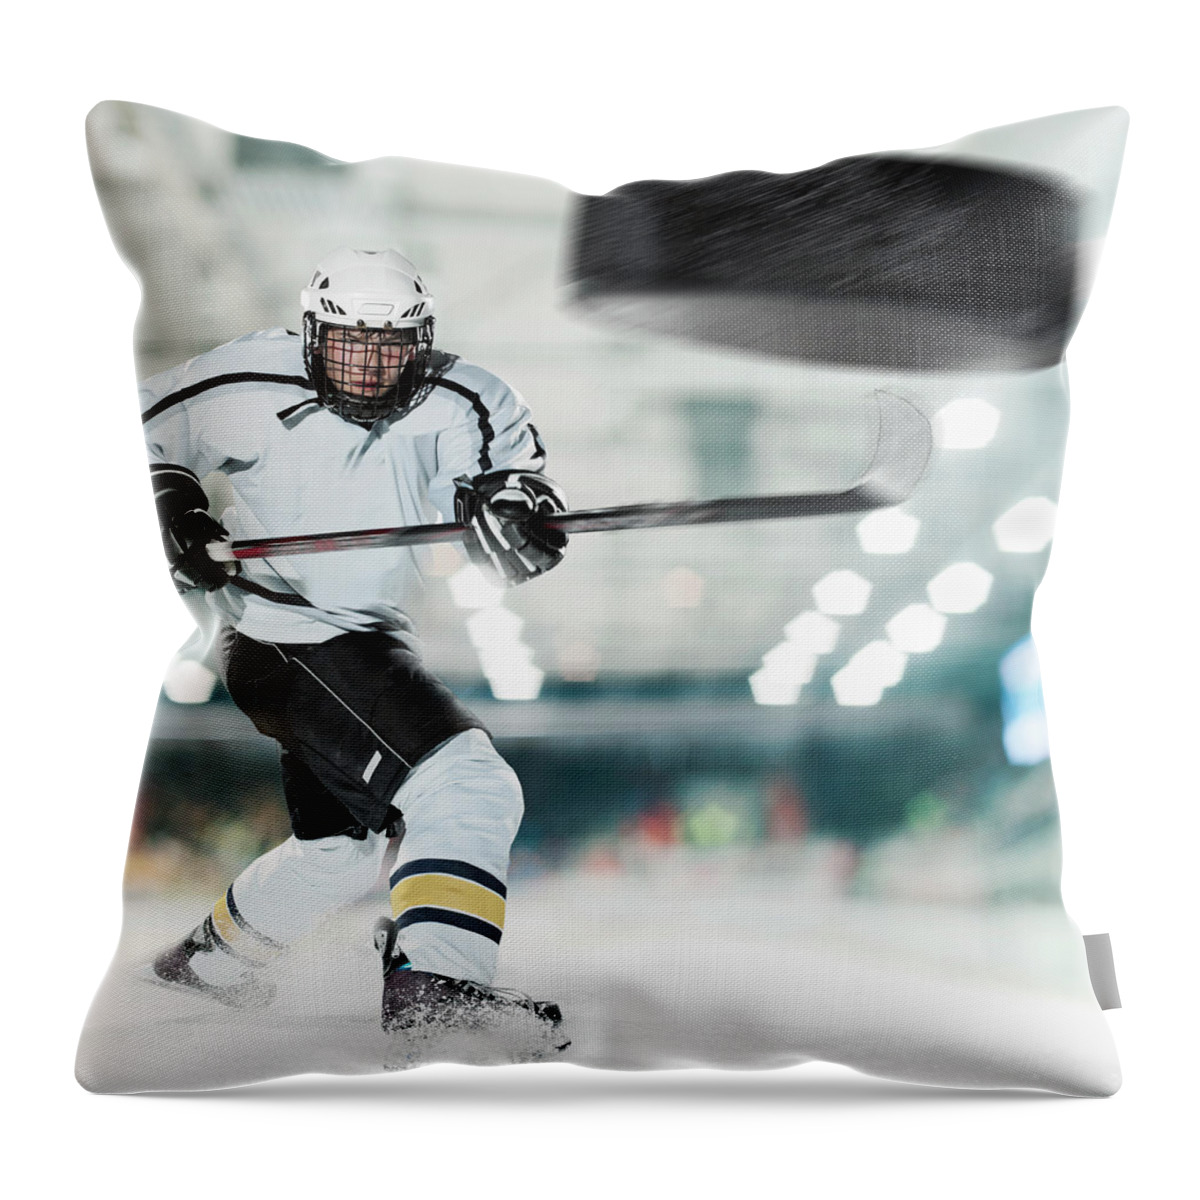 People Throw Pillow featuring the photograph Puck Shot By Ice Hockey Player by Bernhard Lang